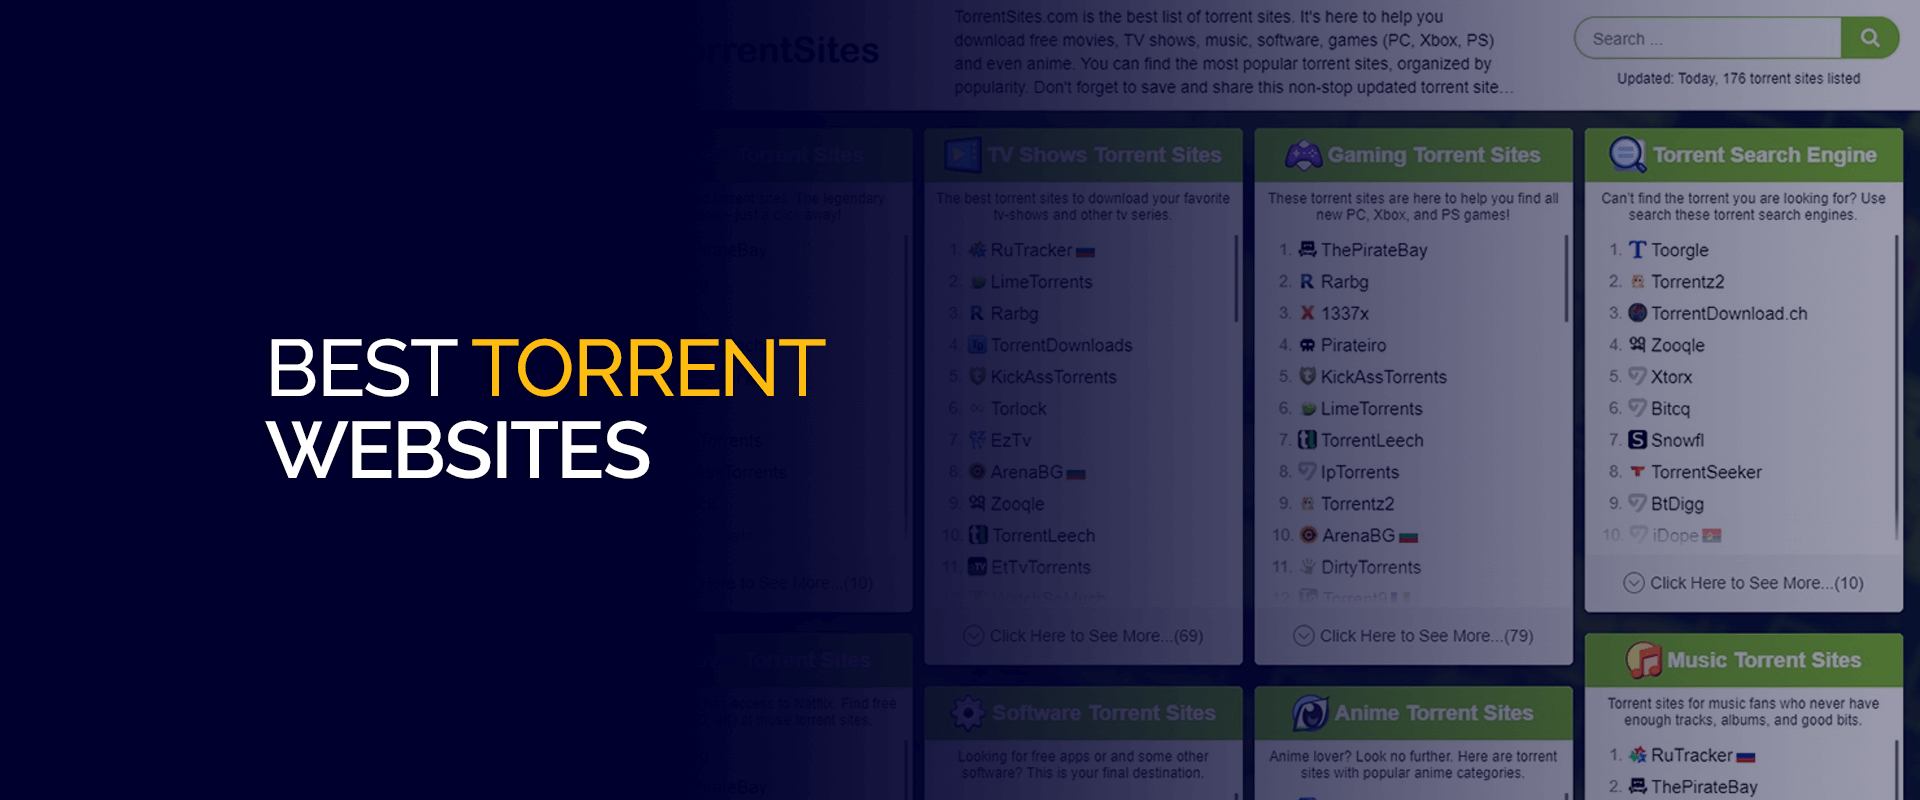 15 Best Torrent Websites For Music, Movies, Games, & More!